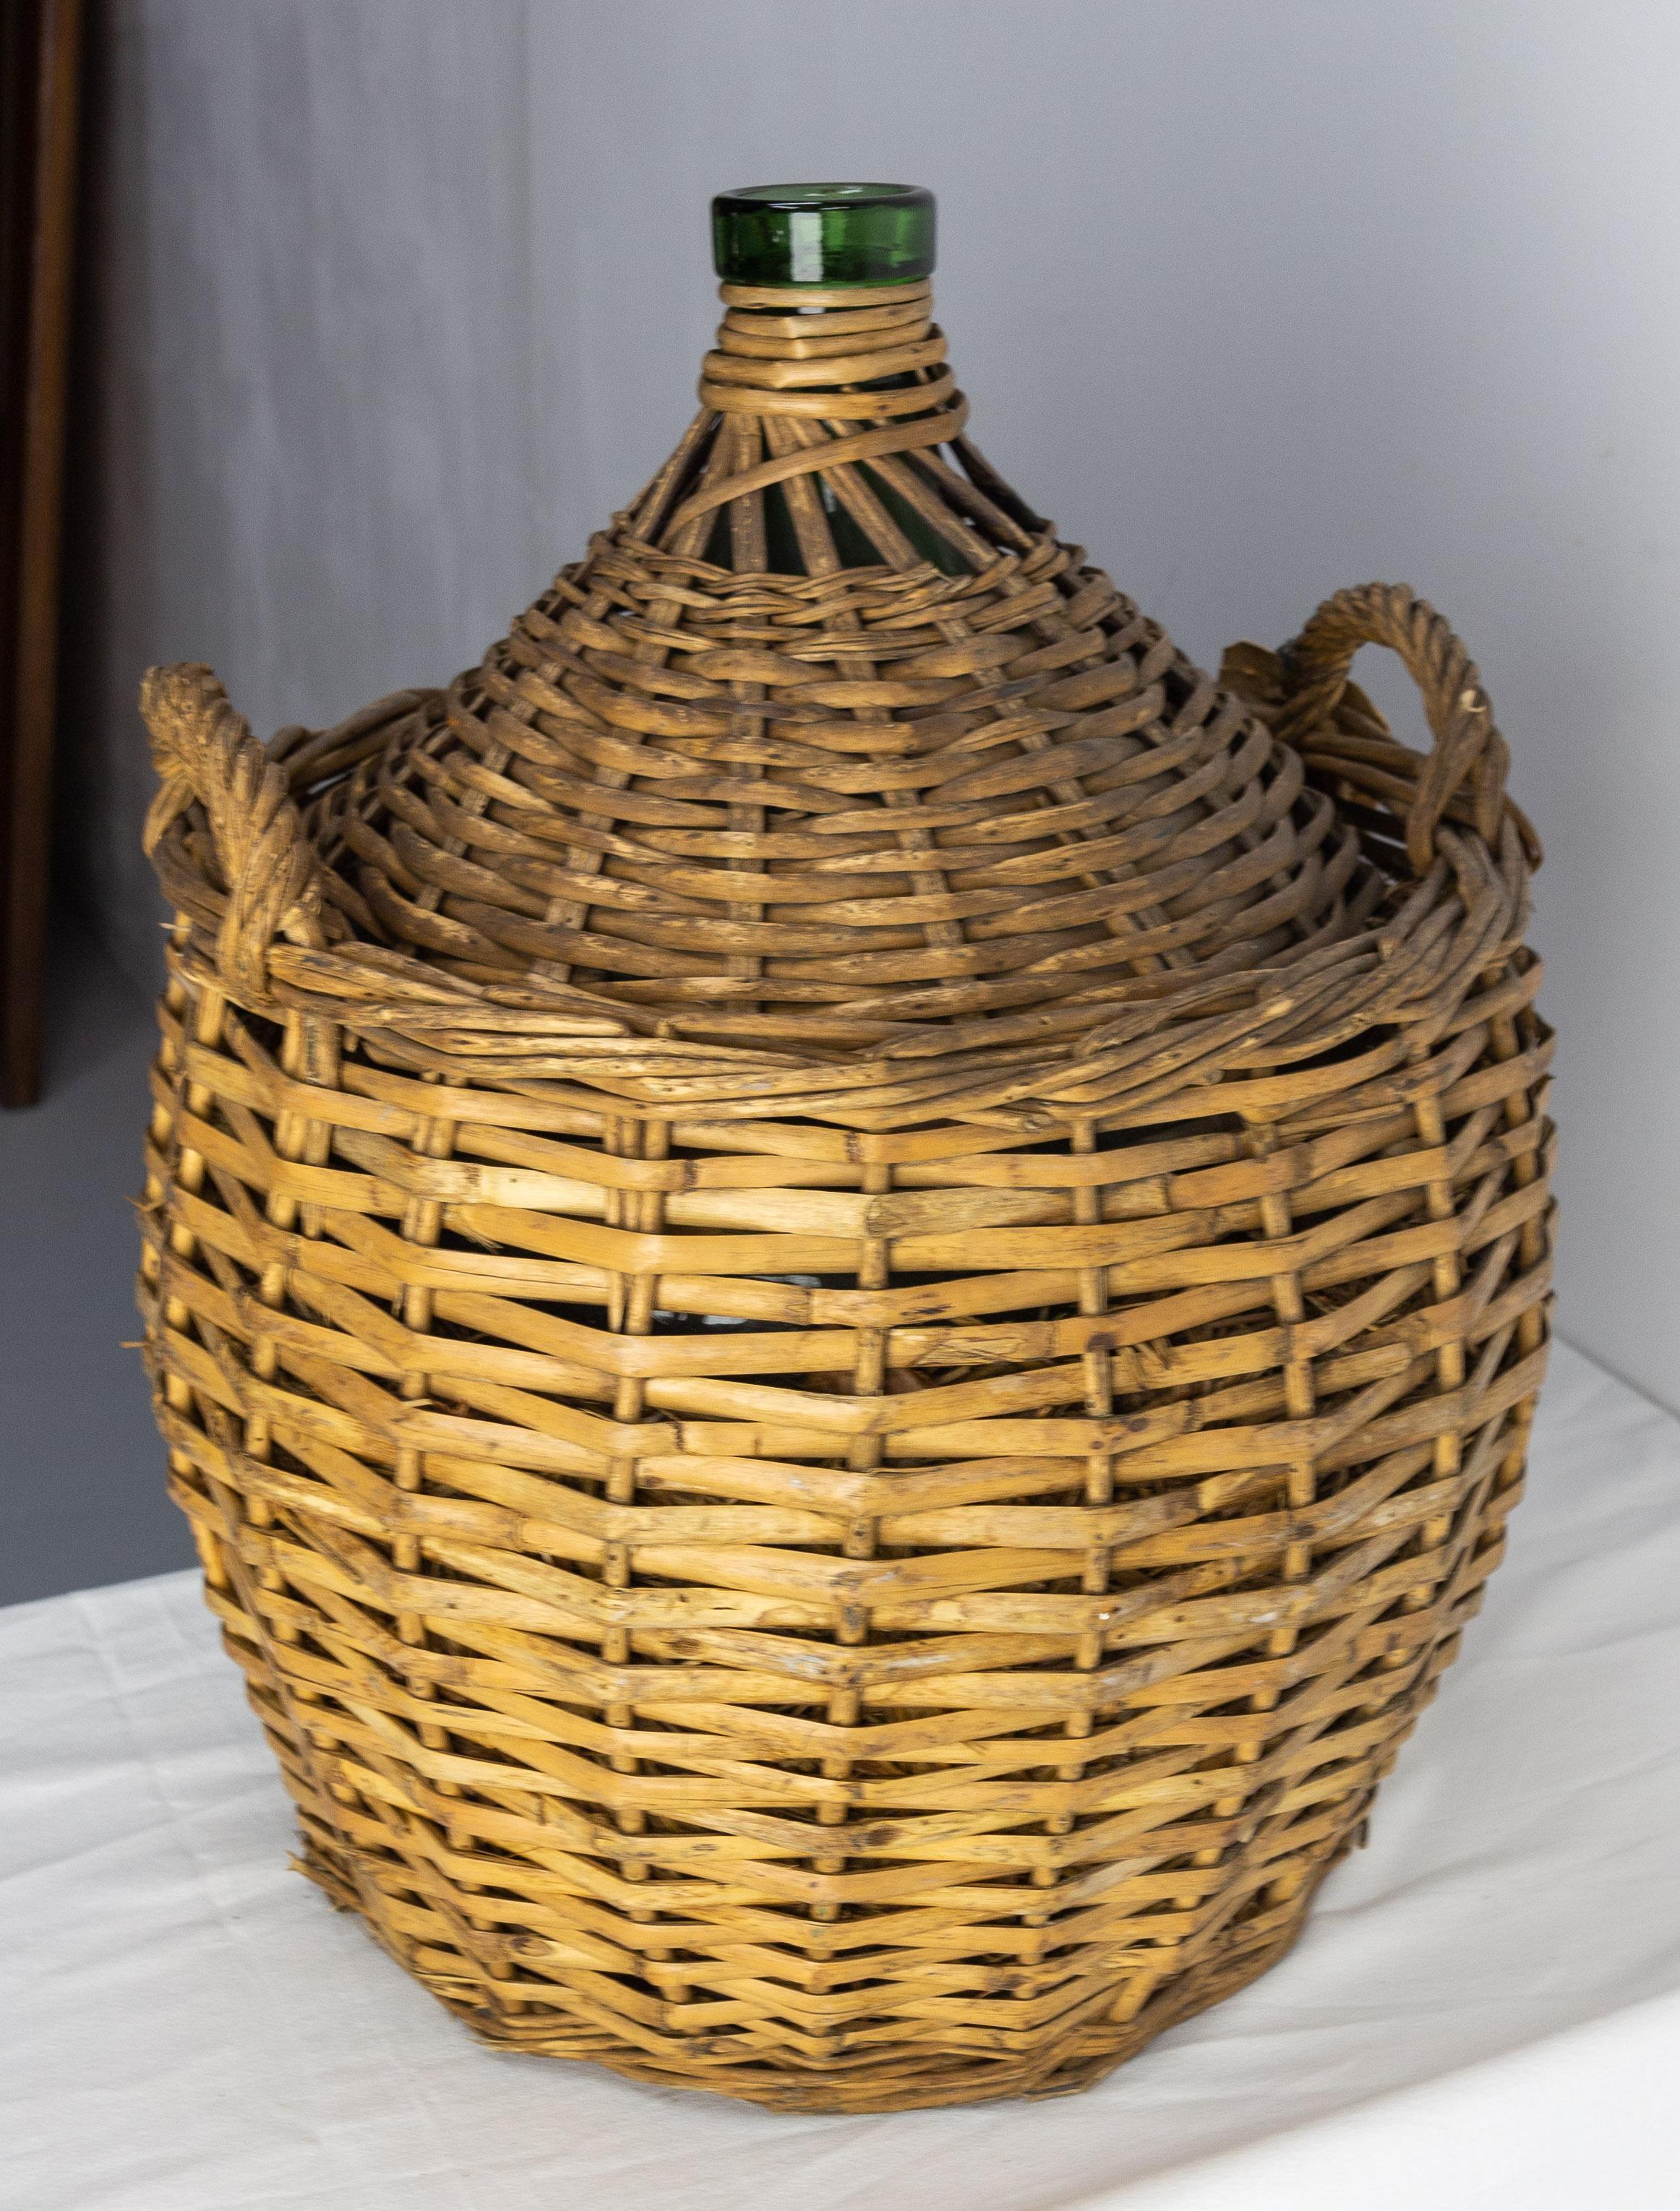 Antique Greenglass Bottle Demijohns or Carboy in Authentic Wicker Basket, France In Good Condition For Sale In Labrit, Landes